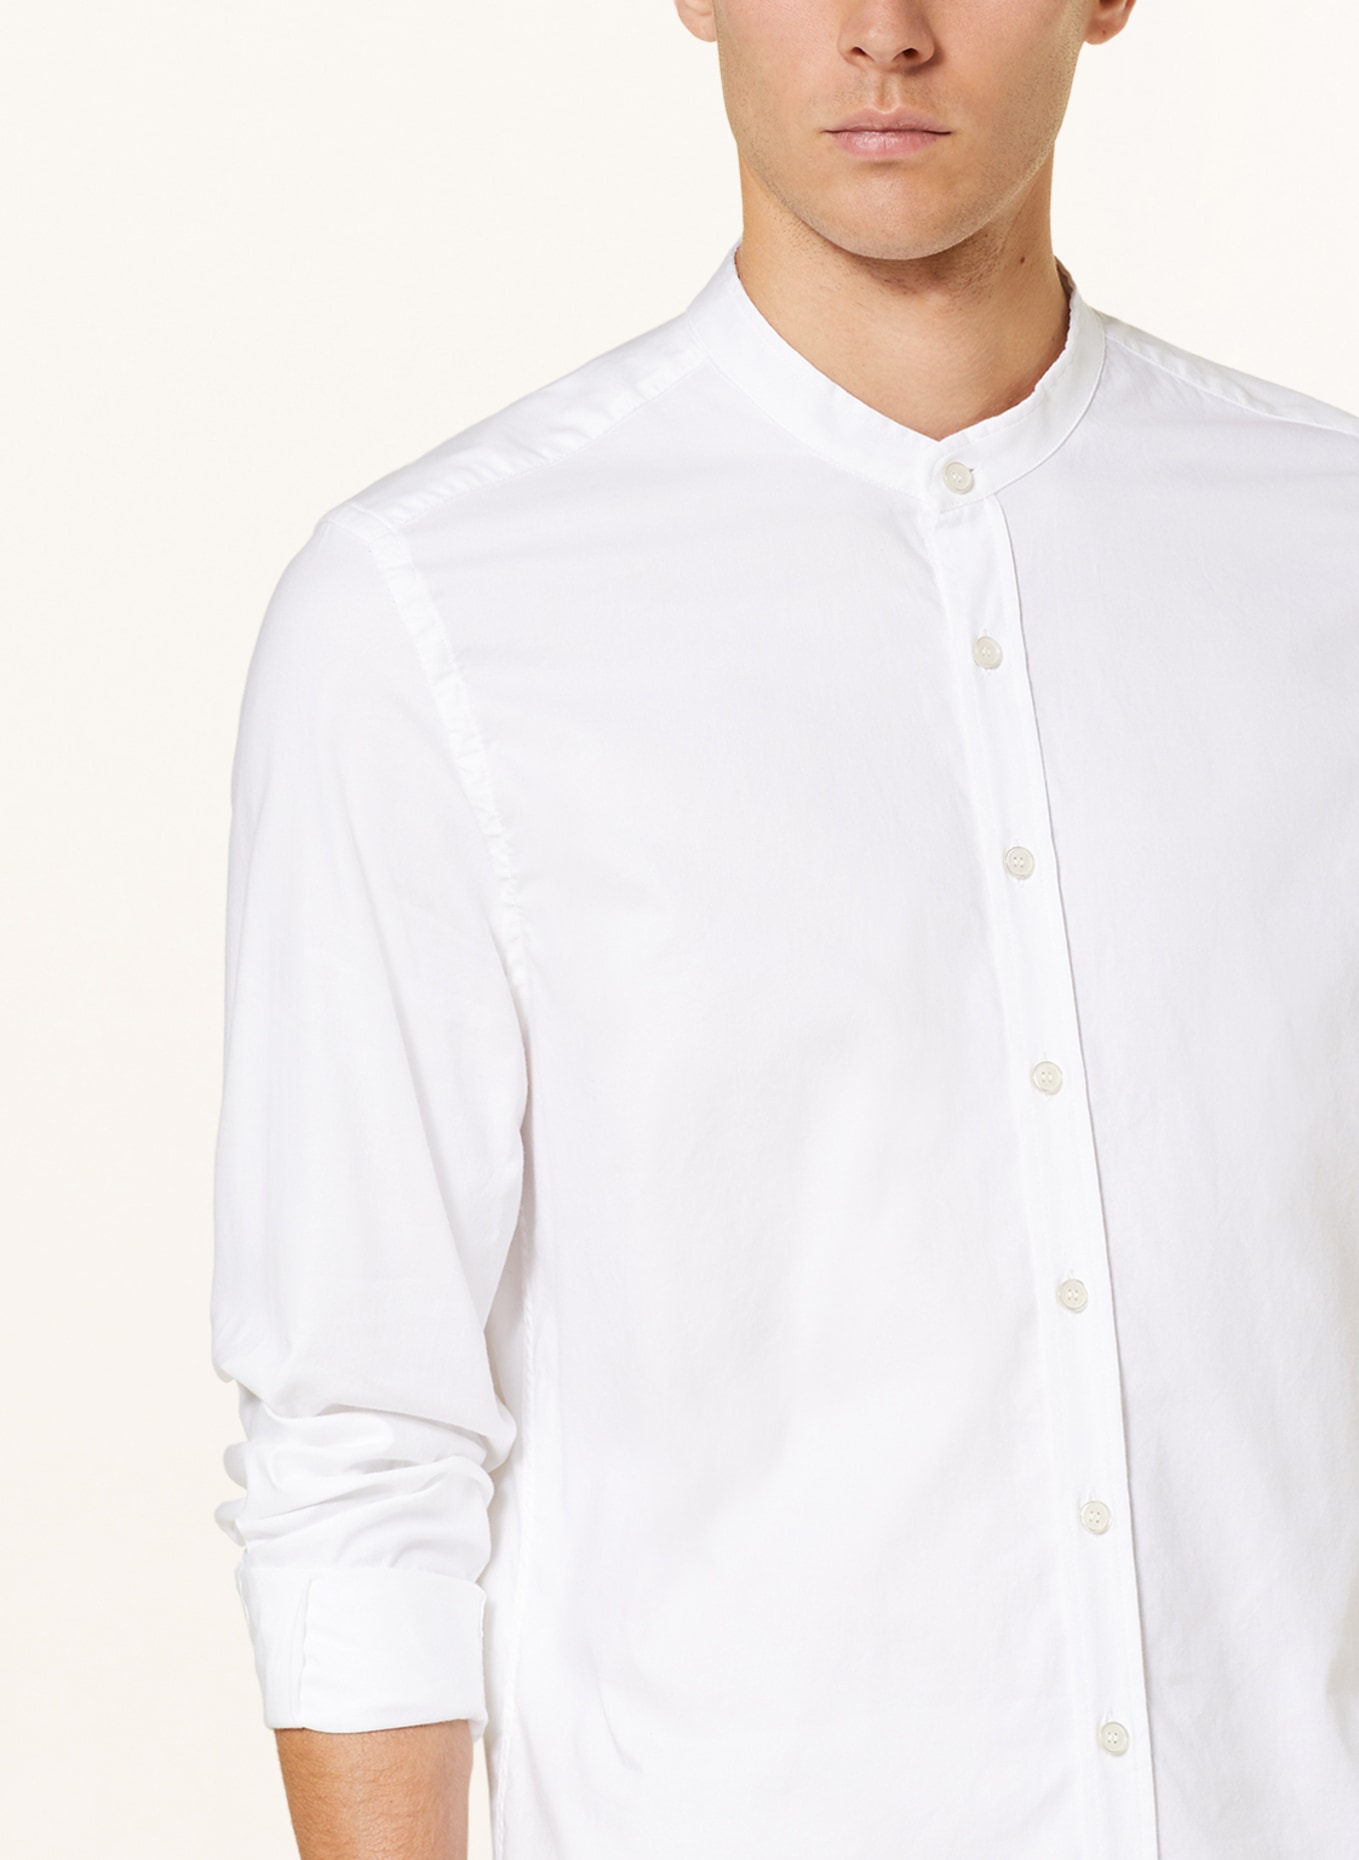 MAERZ MUENCHEN Shirt modern fit, Color: WHITE (Image 4)